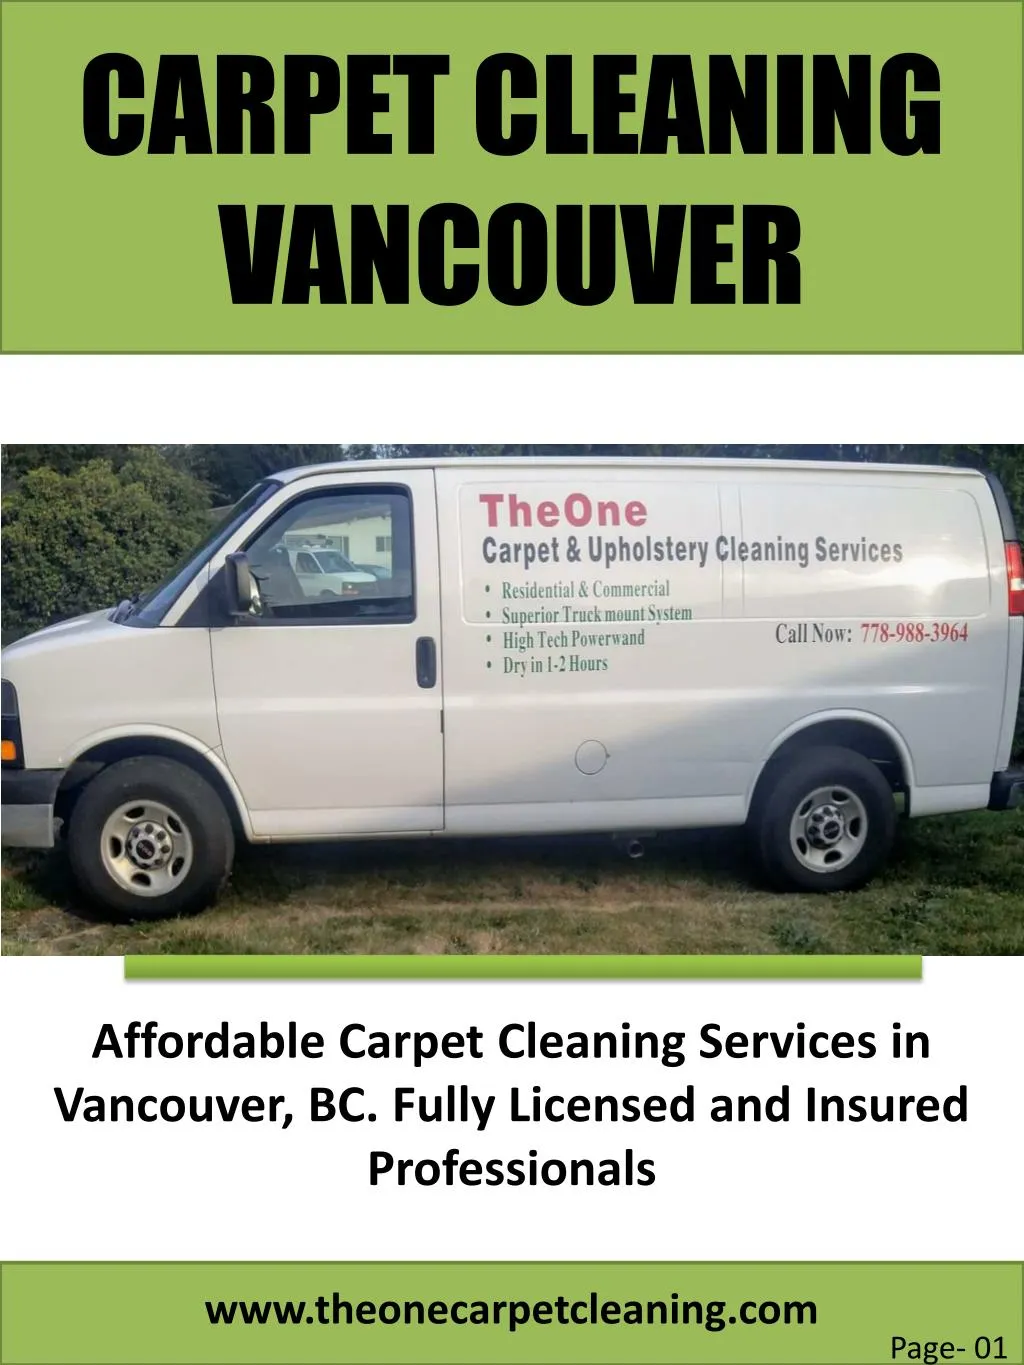 carpet cleaning vancouver n.